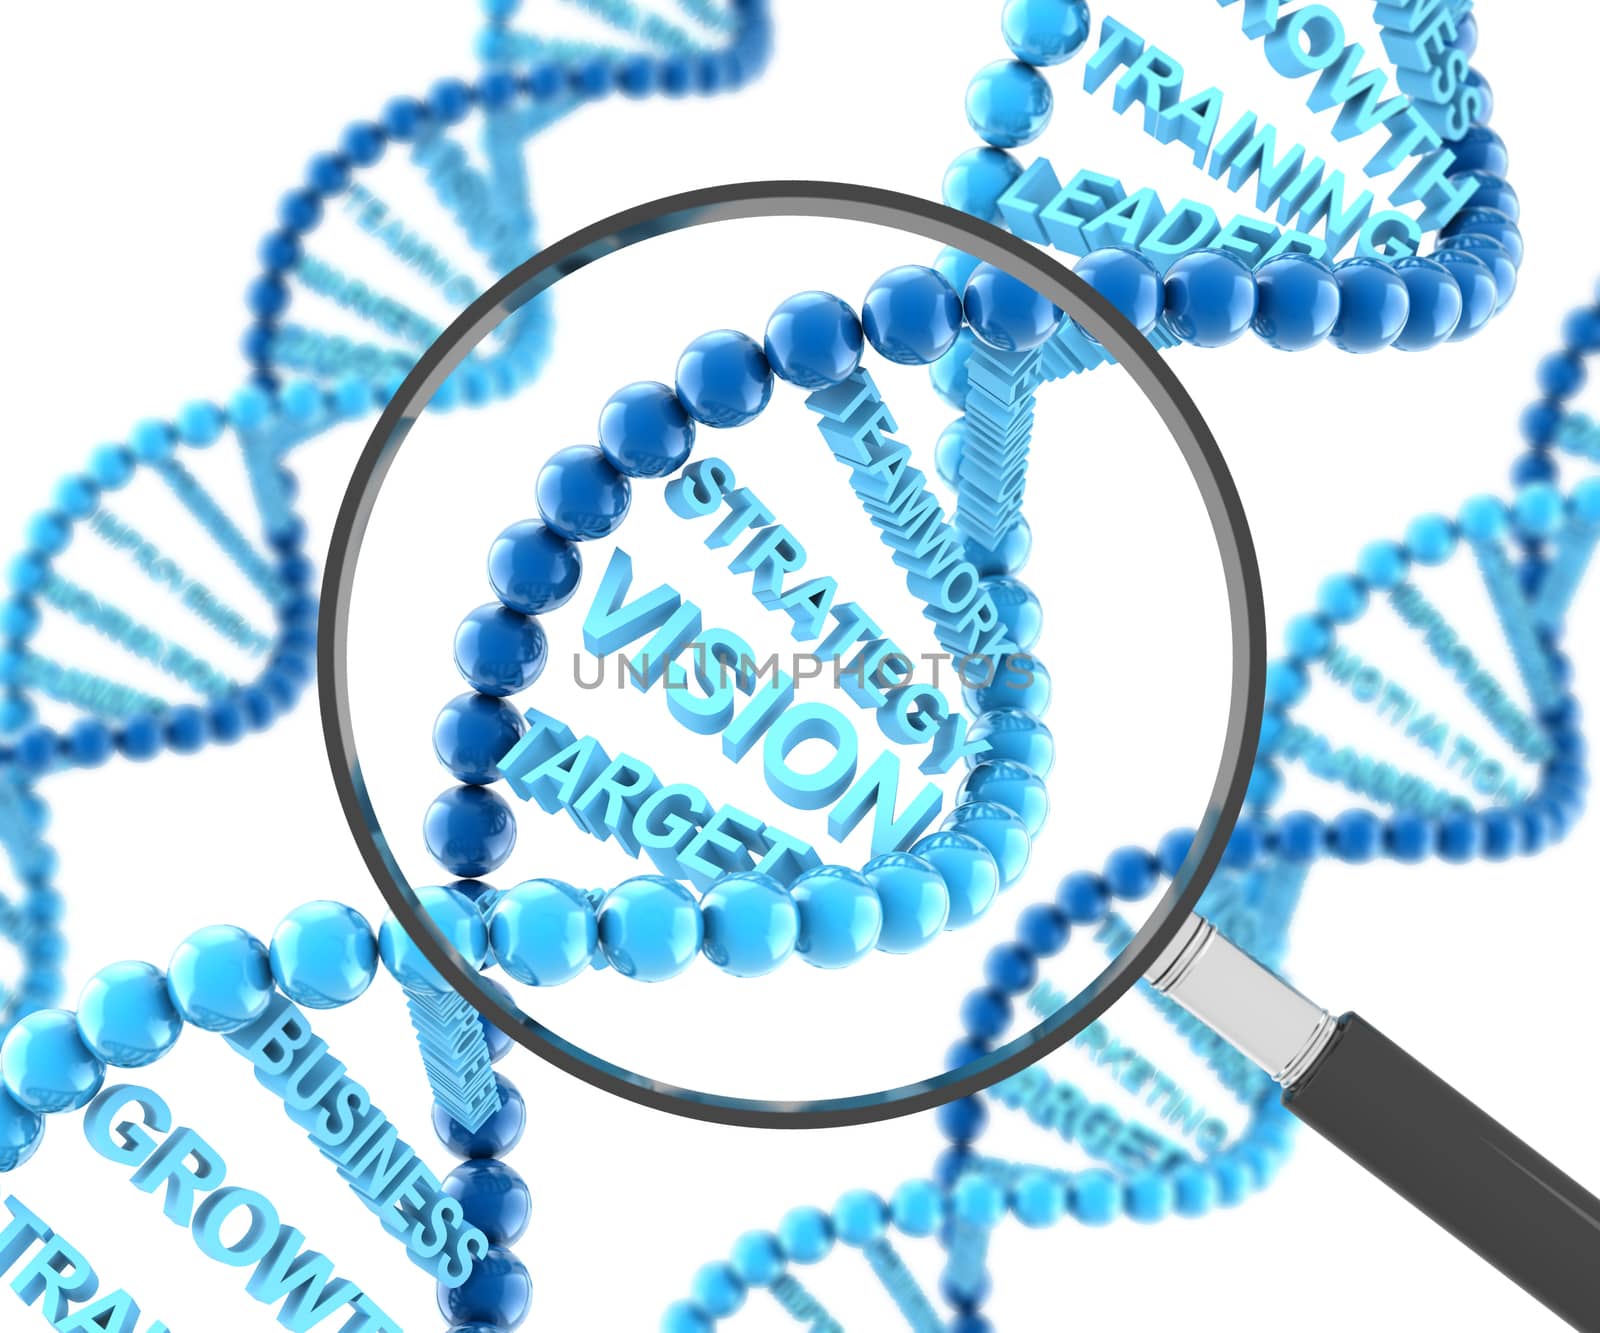 DNA molecules with business words and magnifying glass, 3d render